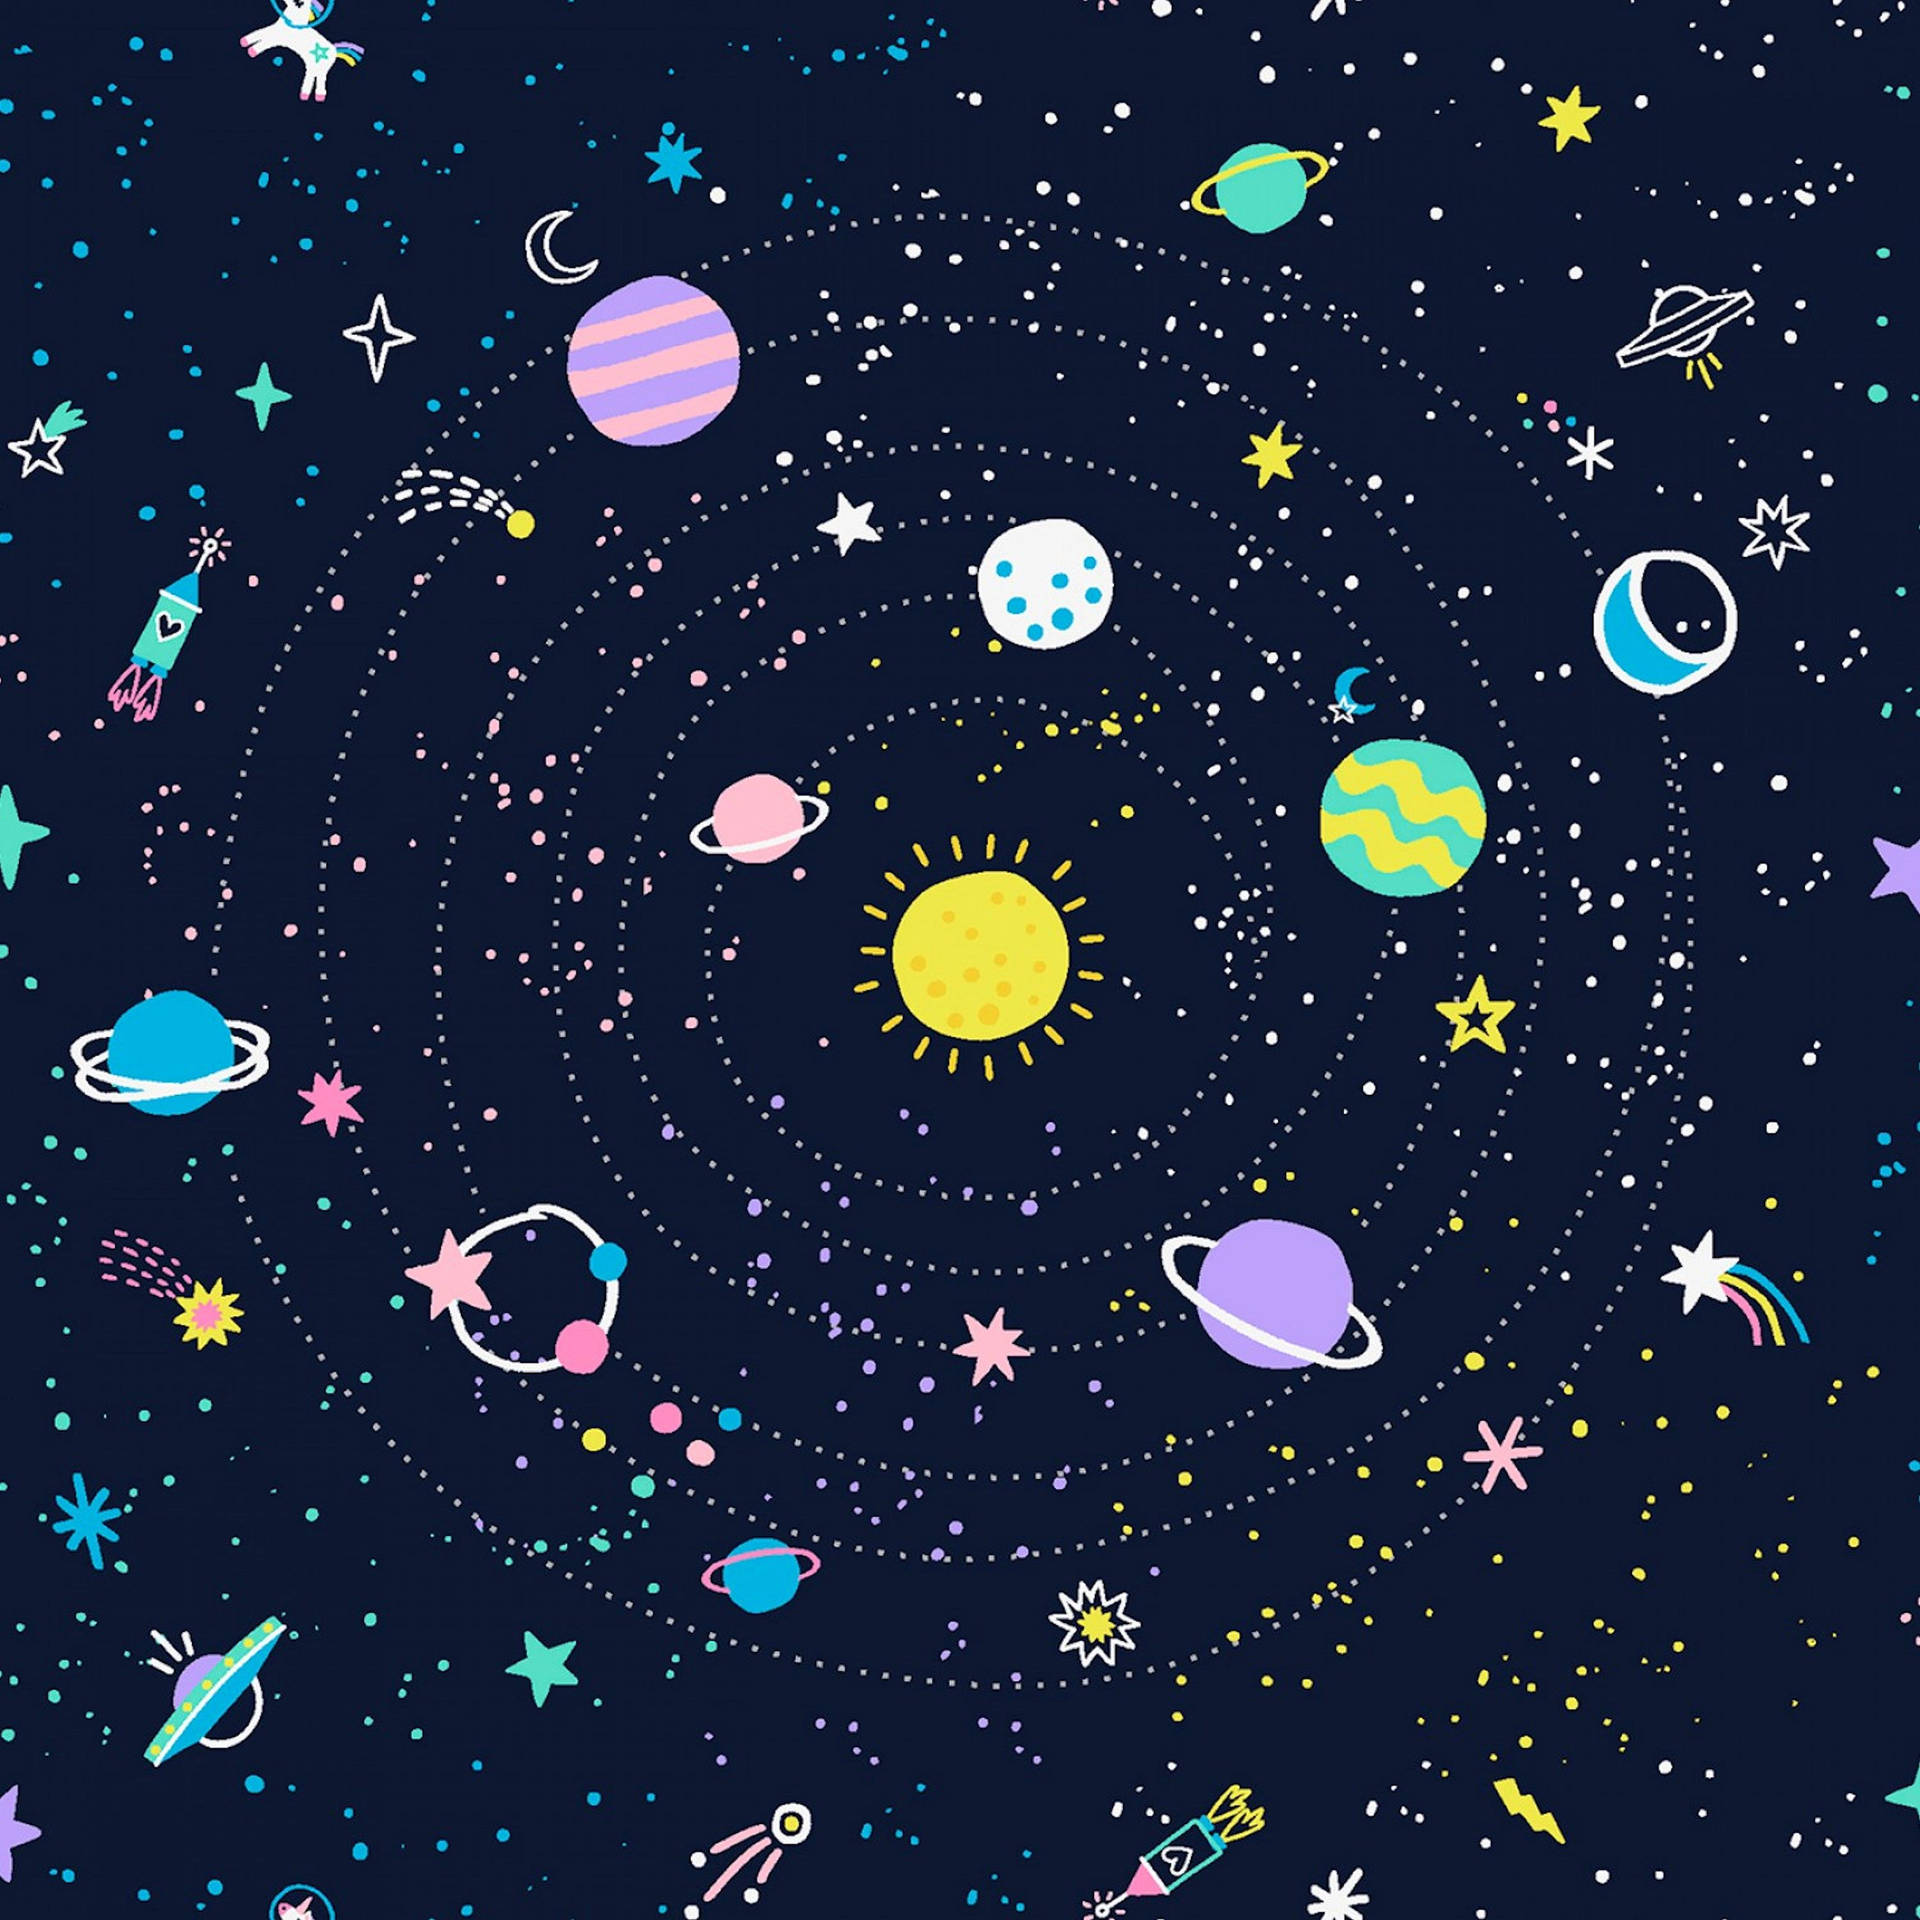 Aesthetic Outer Space Cartoon Art